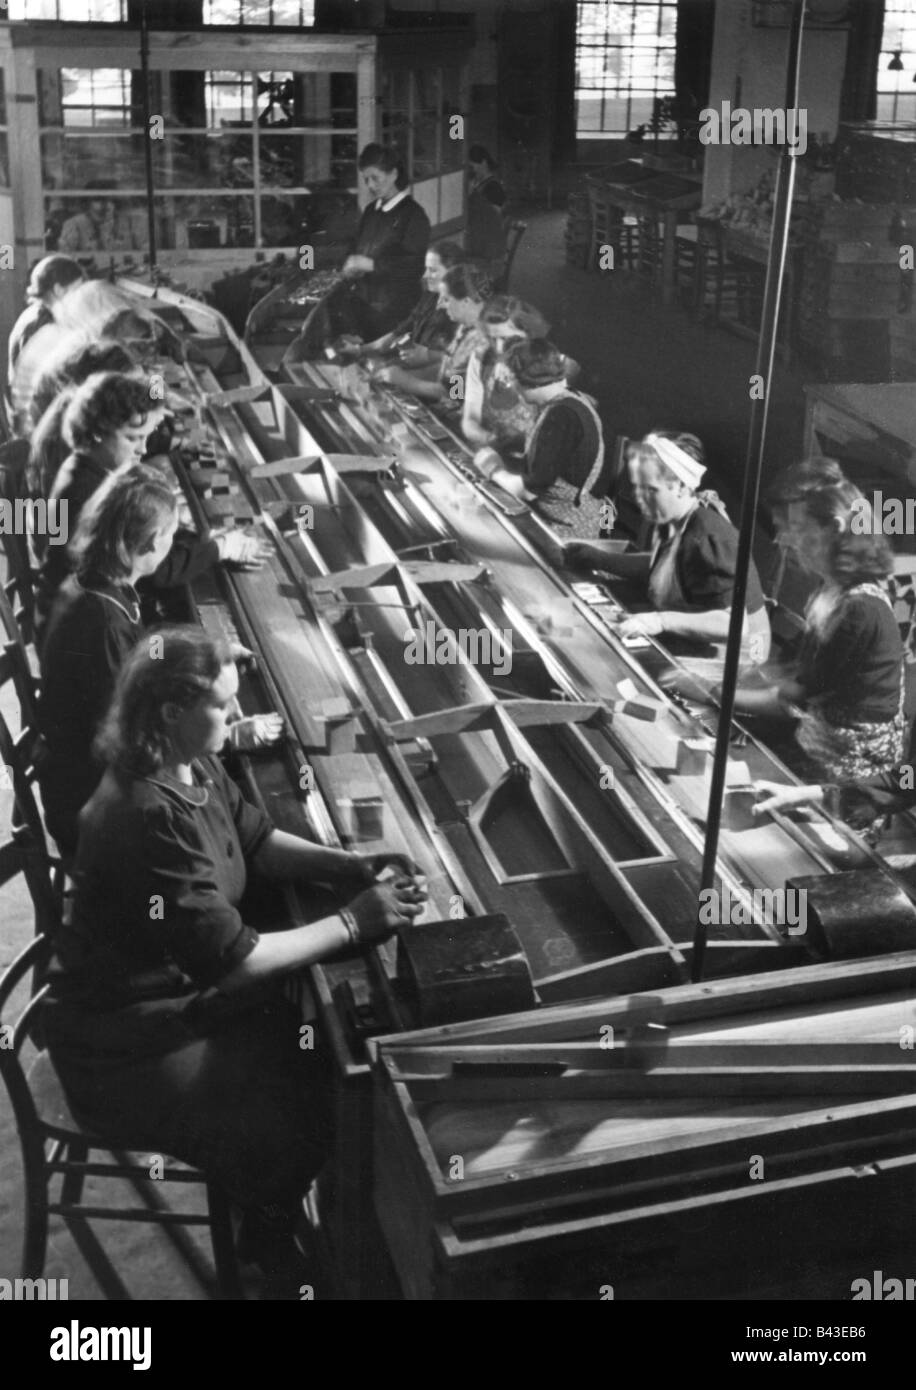 events, Second World War / WWII, Germany, armaments industry, production of ammunition, women packing, Berlin, 1942, propagada photo, Stock Photo